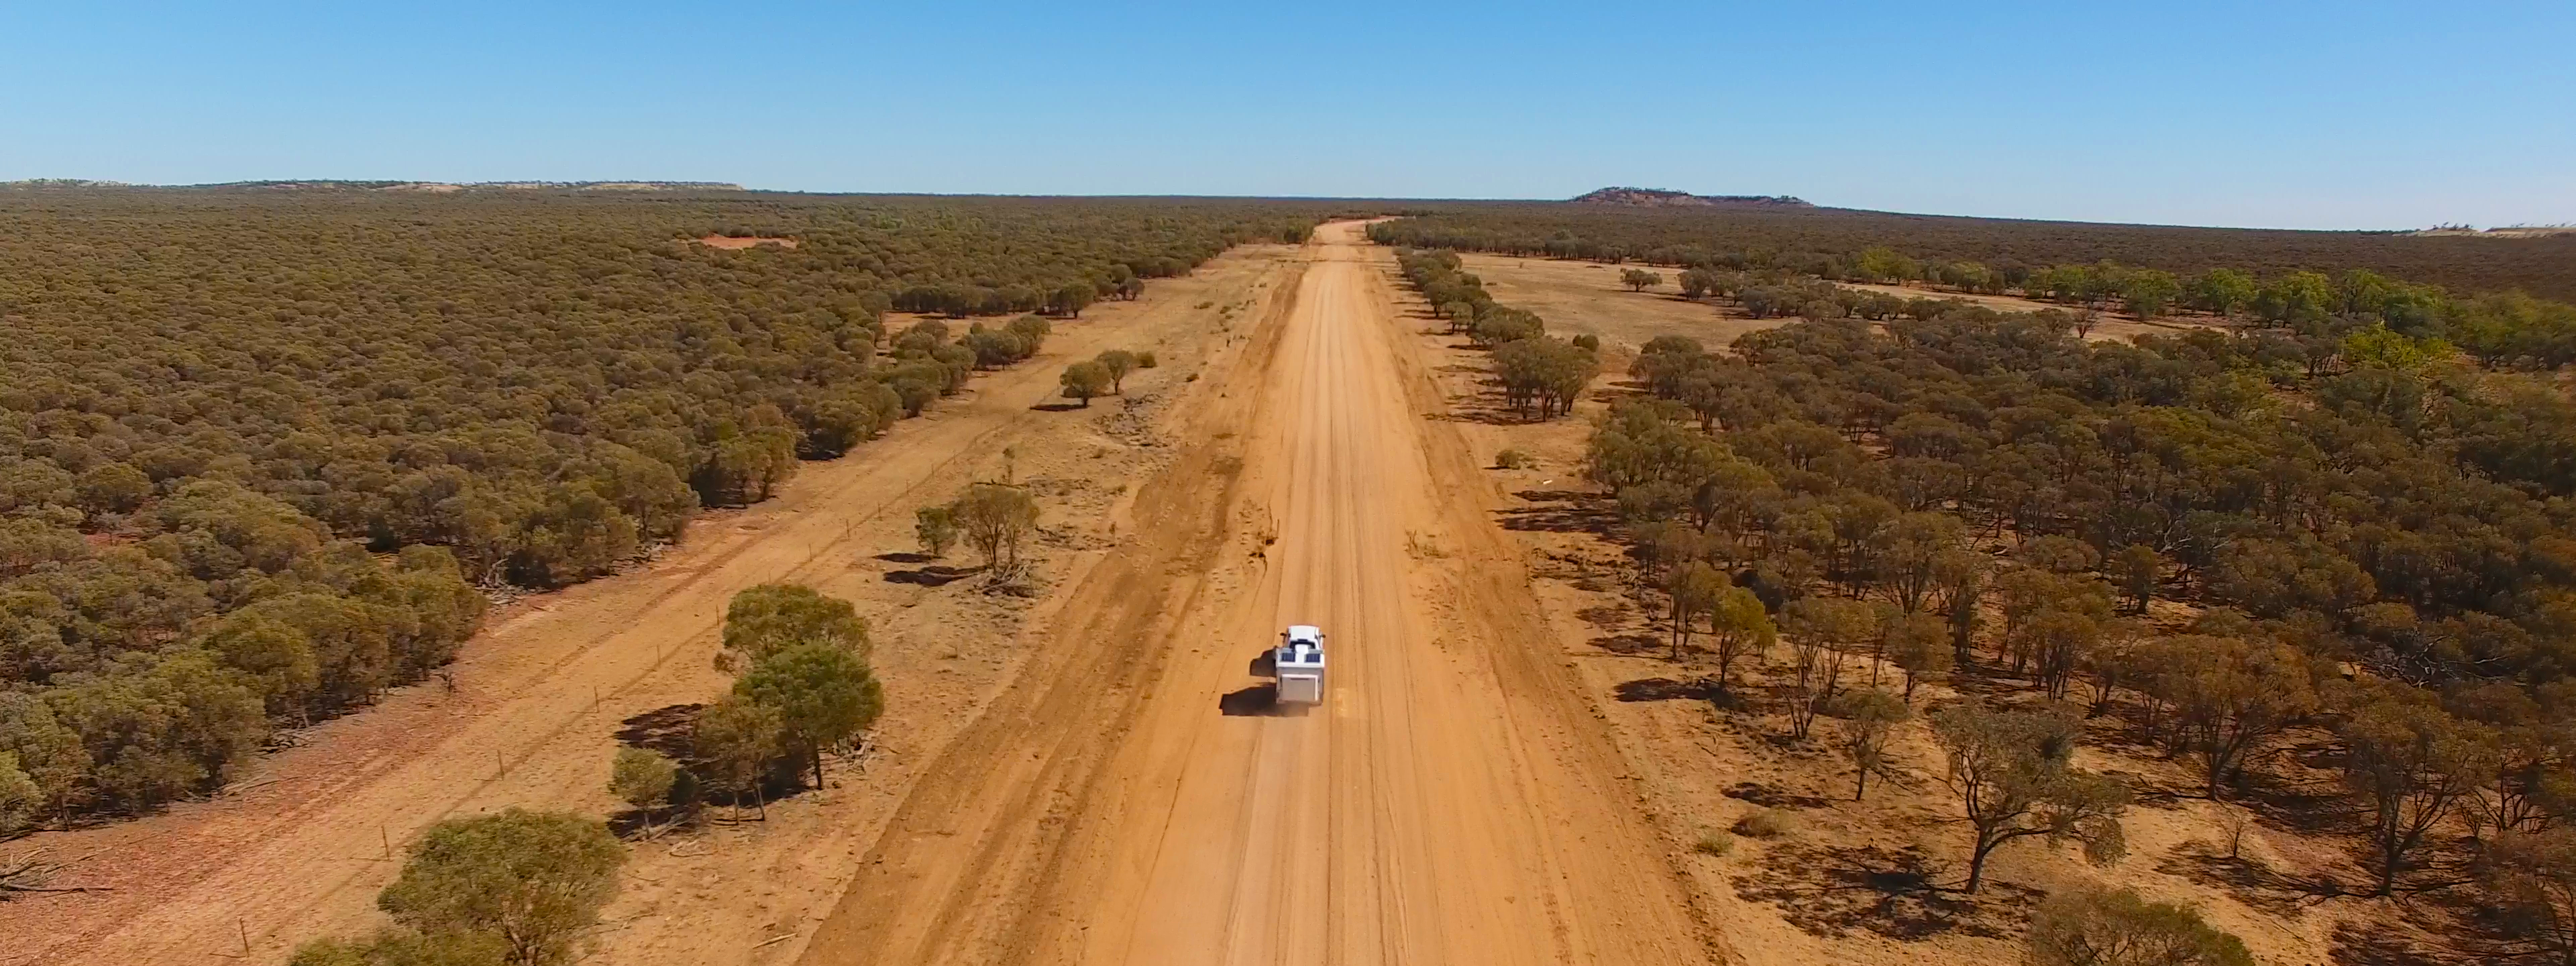 Modcon RV off road hybrid camper trailers C3 being towed in Queensland outback